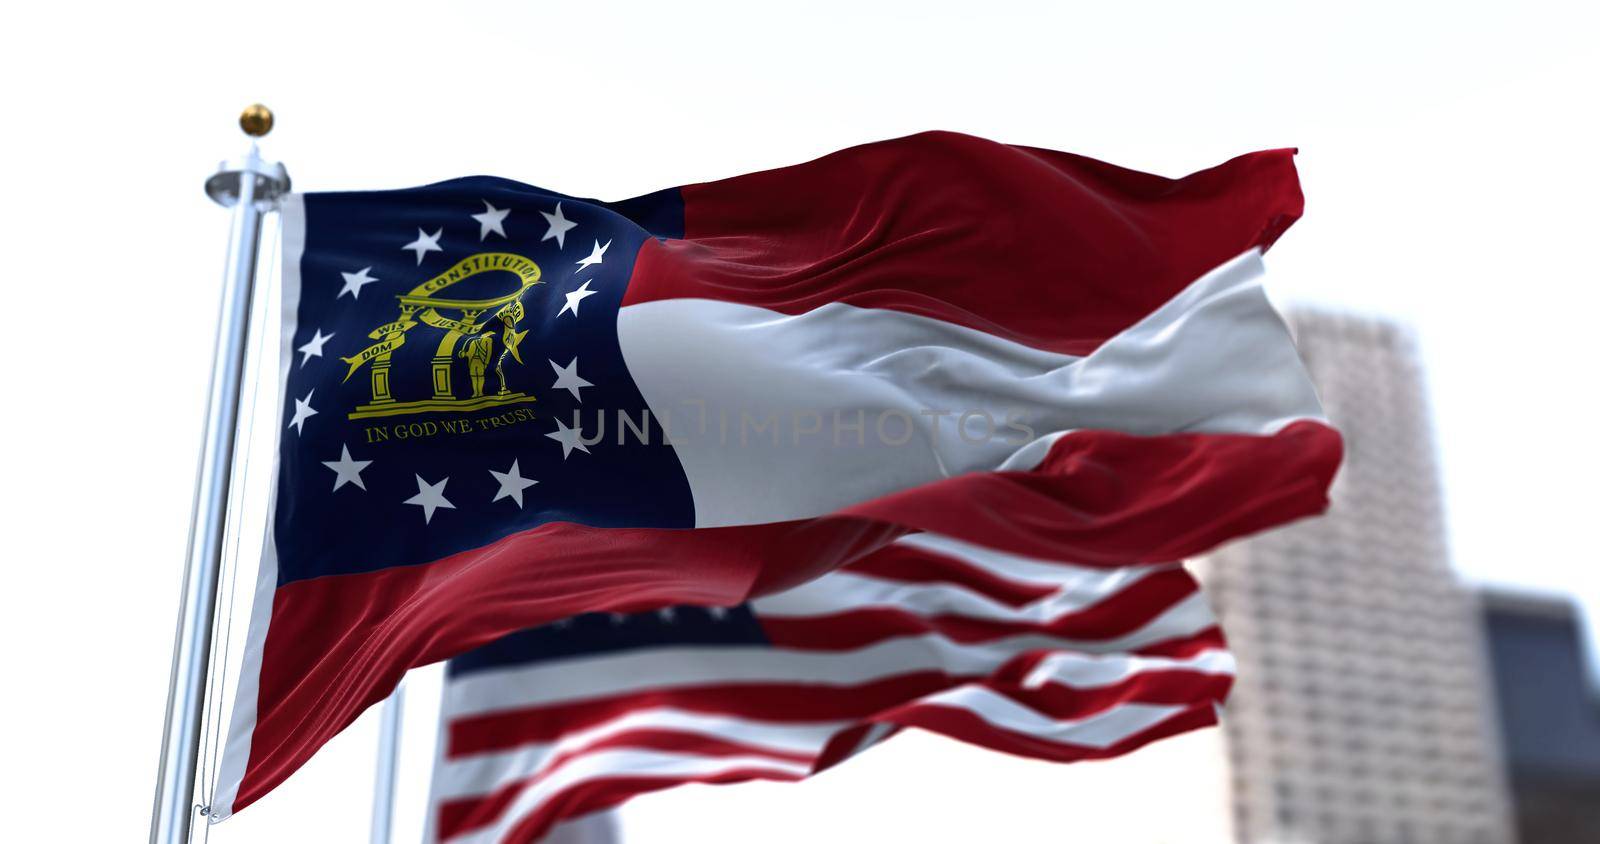 the flag of the US state of Georgia waving in the wind with the American stars and stripes flag blurred in the background. On January 2, 1788, Georgia became the fourth state to join the Union